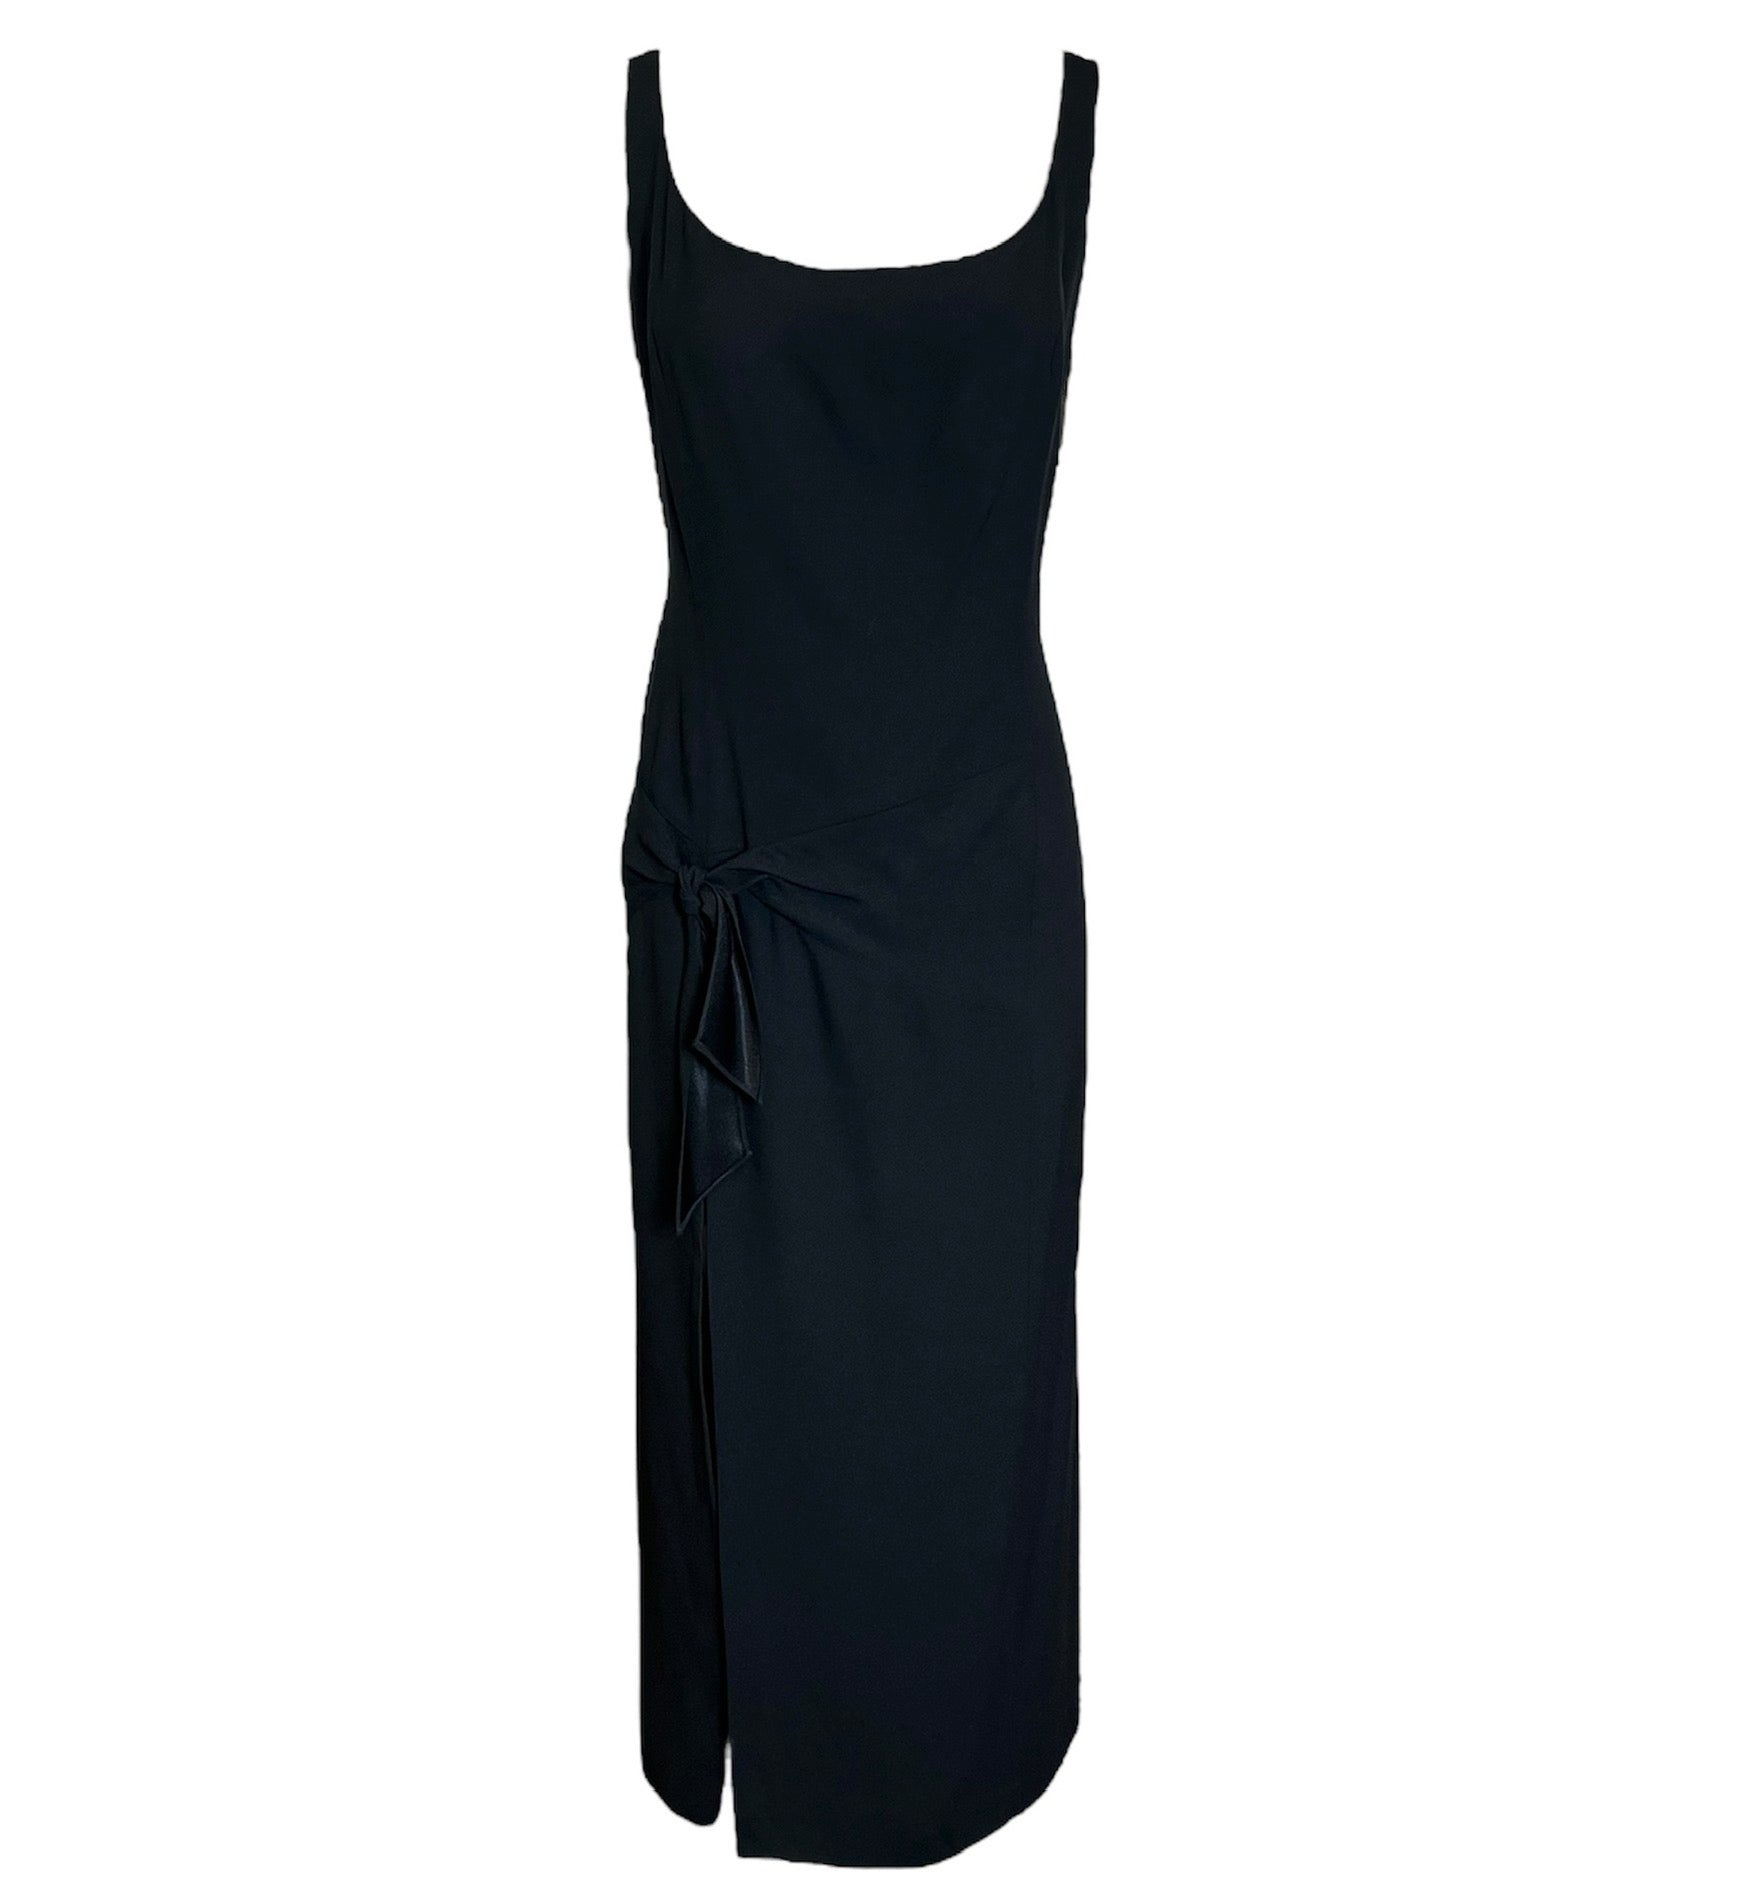 Galliano Black Crepe Silk-lined Dress with Knotted Waist FRONT PHOTO 1 OF 4